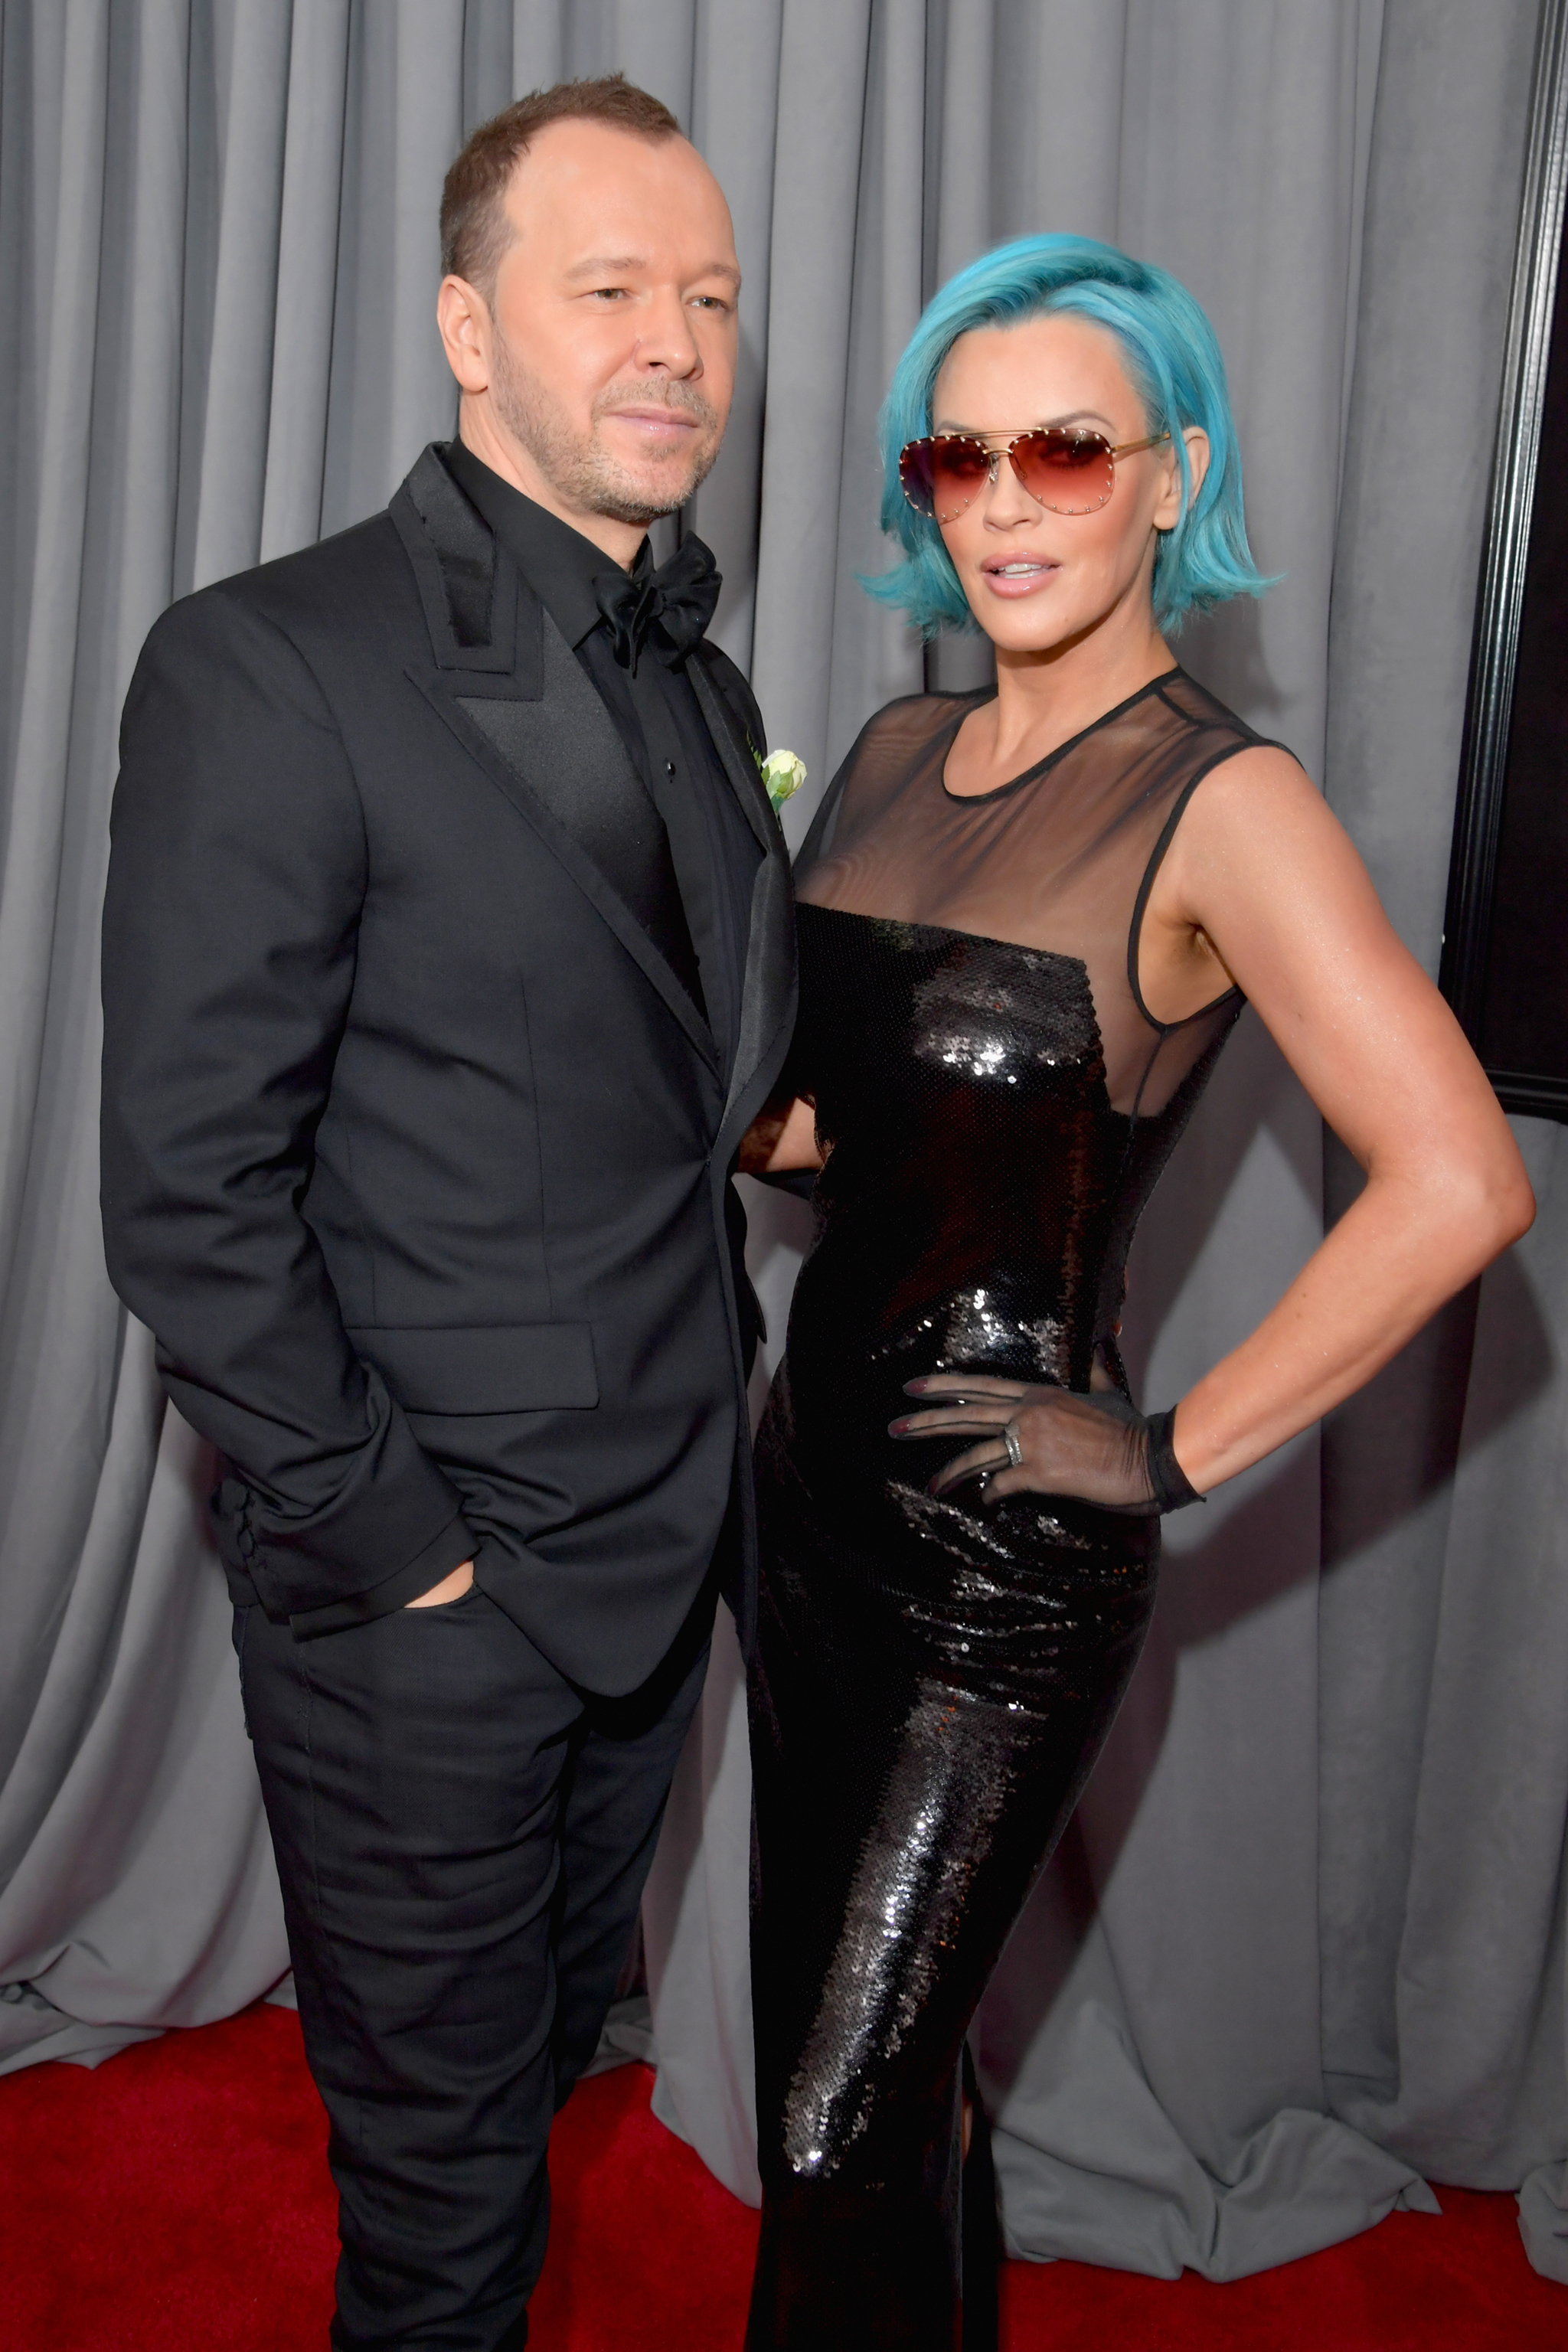 Actors Donnie Wahlberg and Jenny McCarthy attend the 60th Annual GRAMMY Awards at Madison Square Garden on January 28, 2018 in New York City.